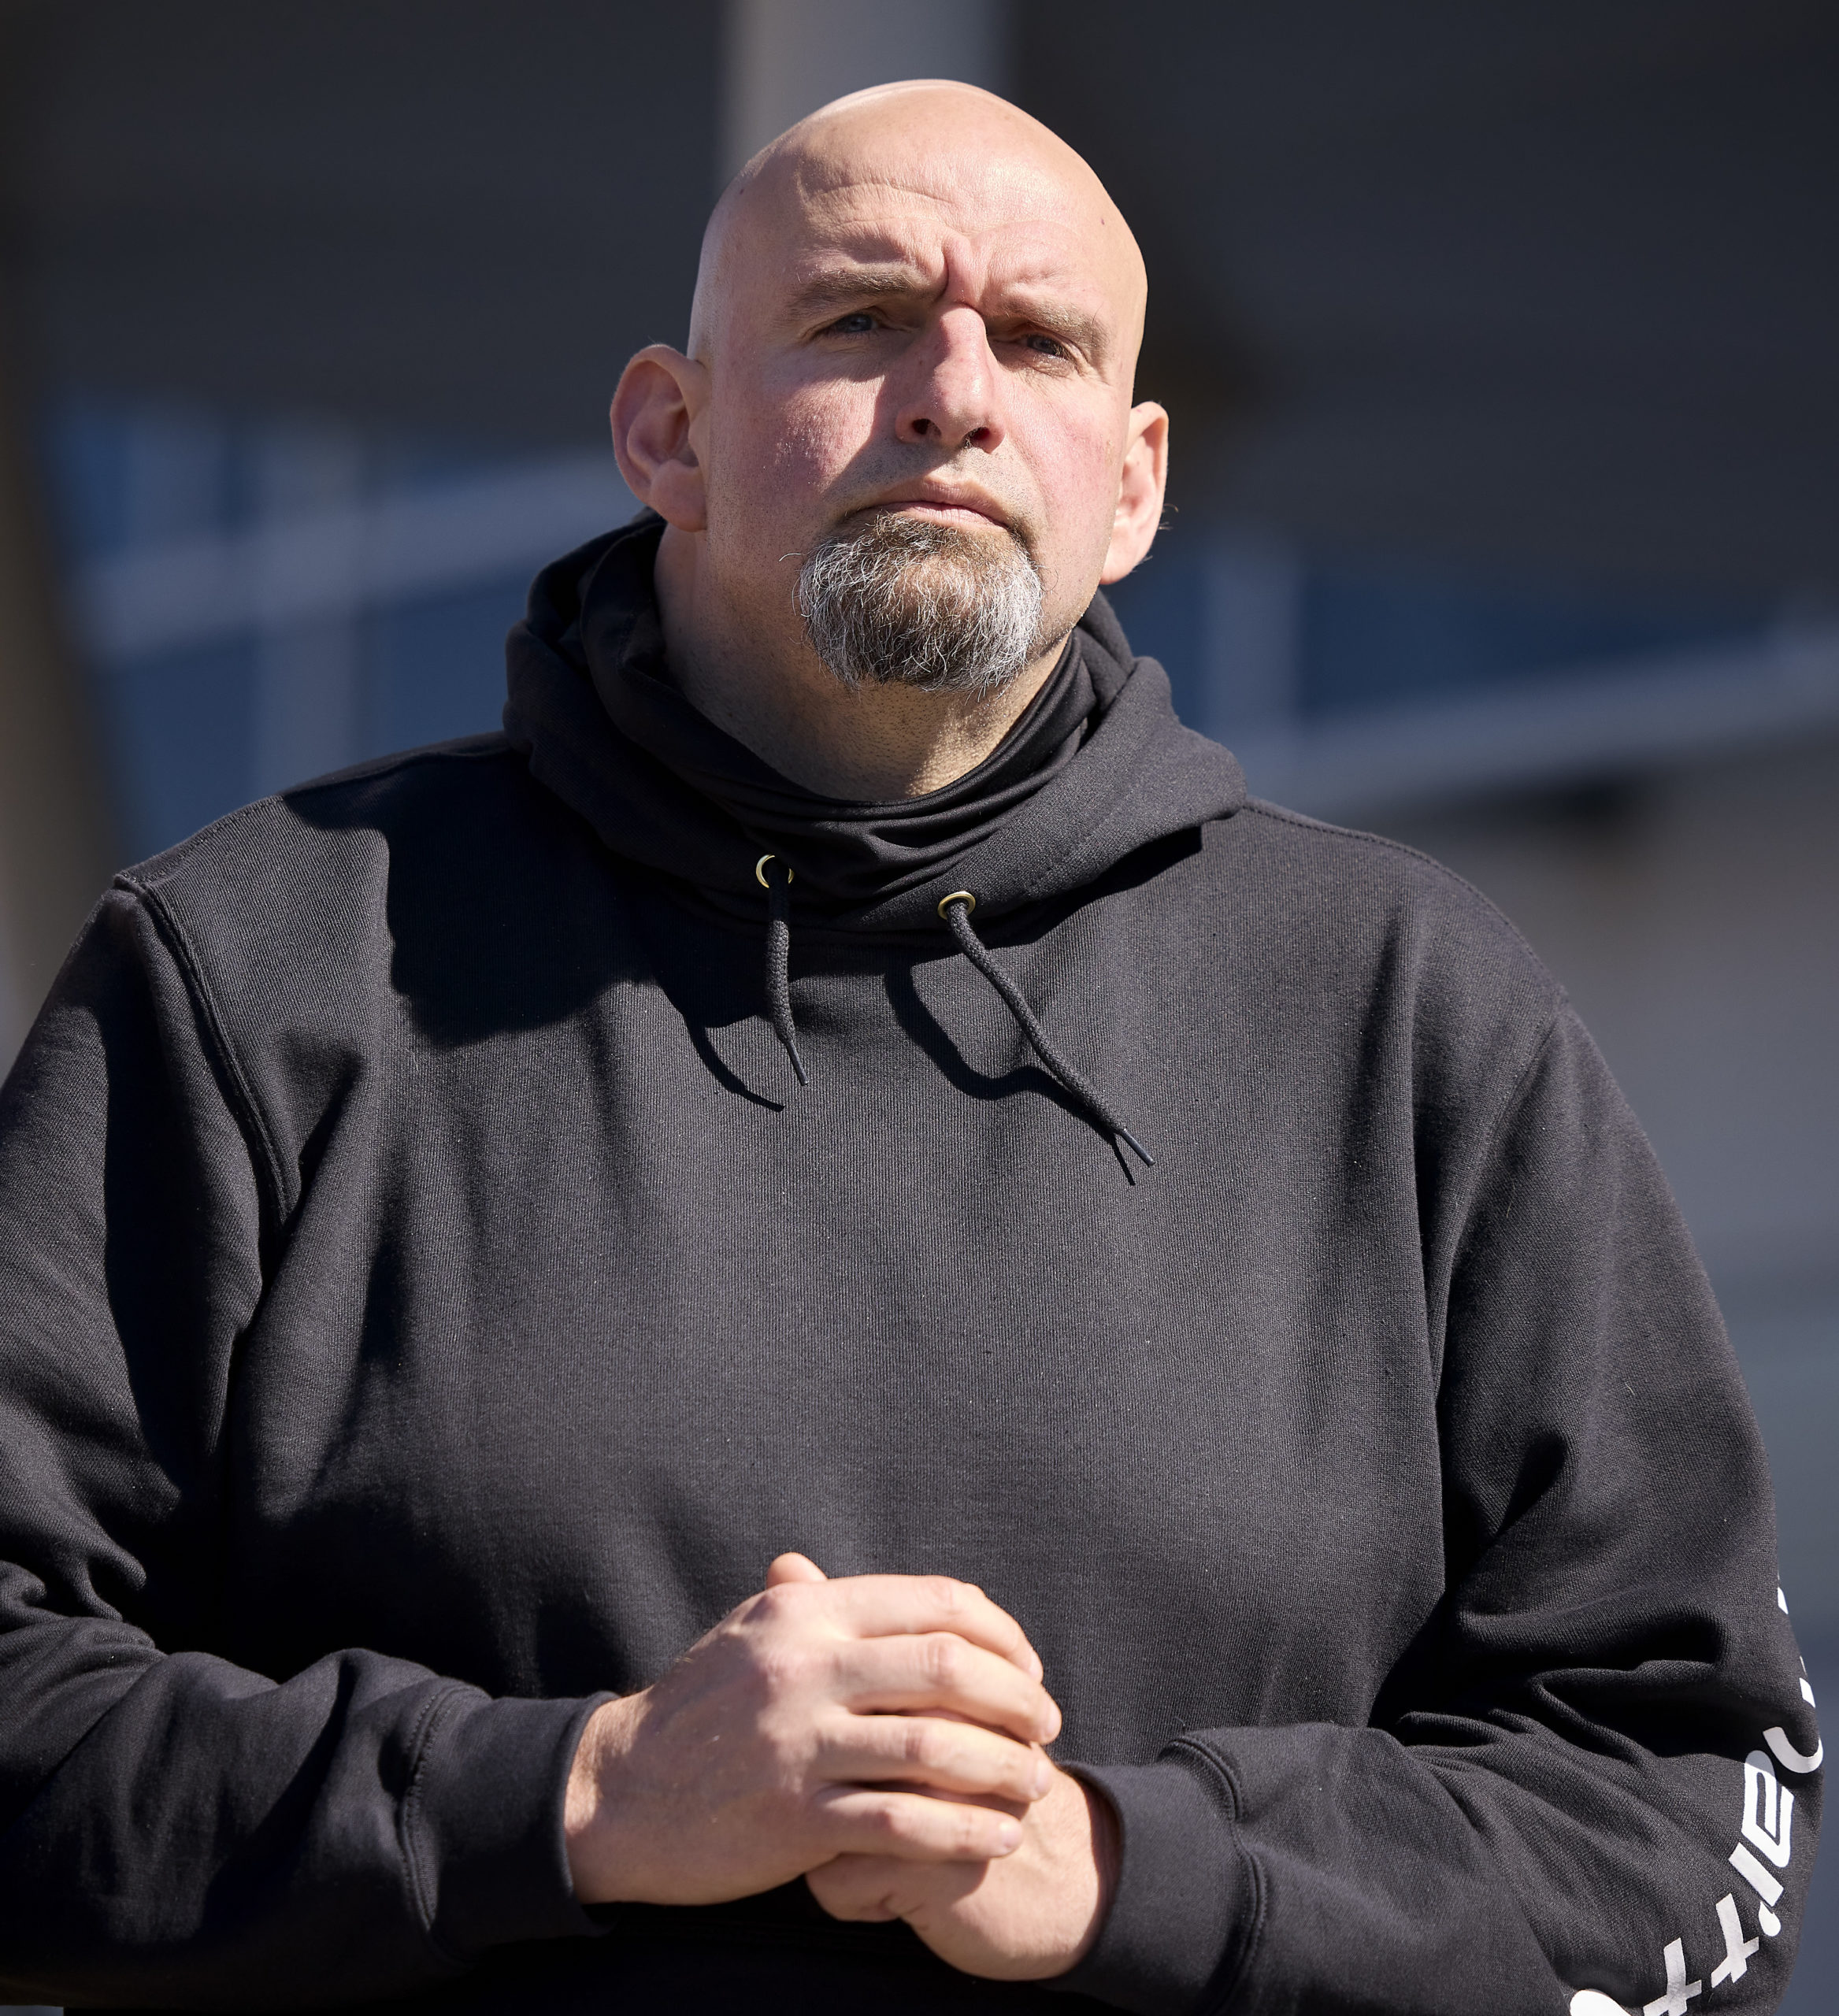 Featured image for “Fetterman, Politics and a Doctor’s Ethical Lapse”